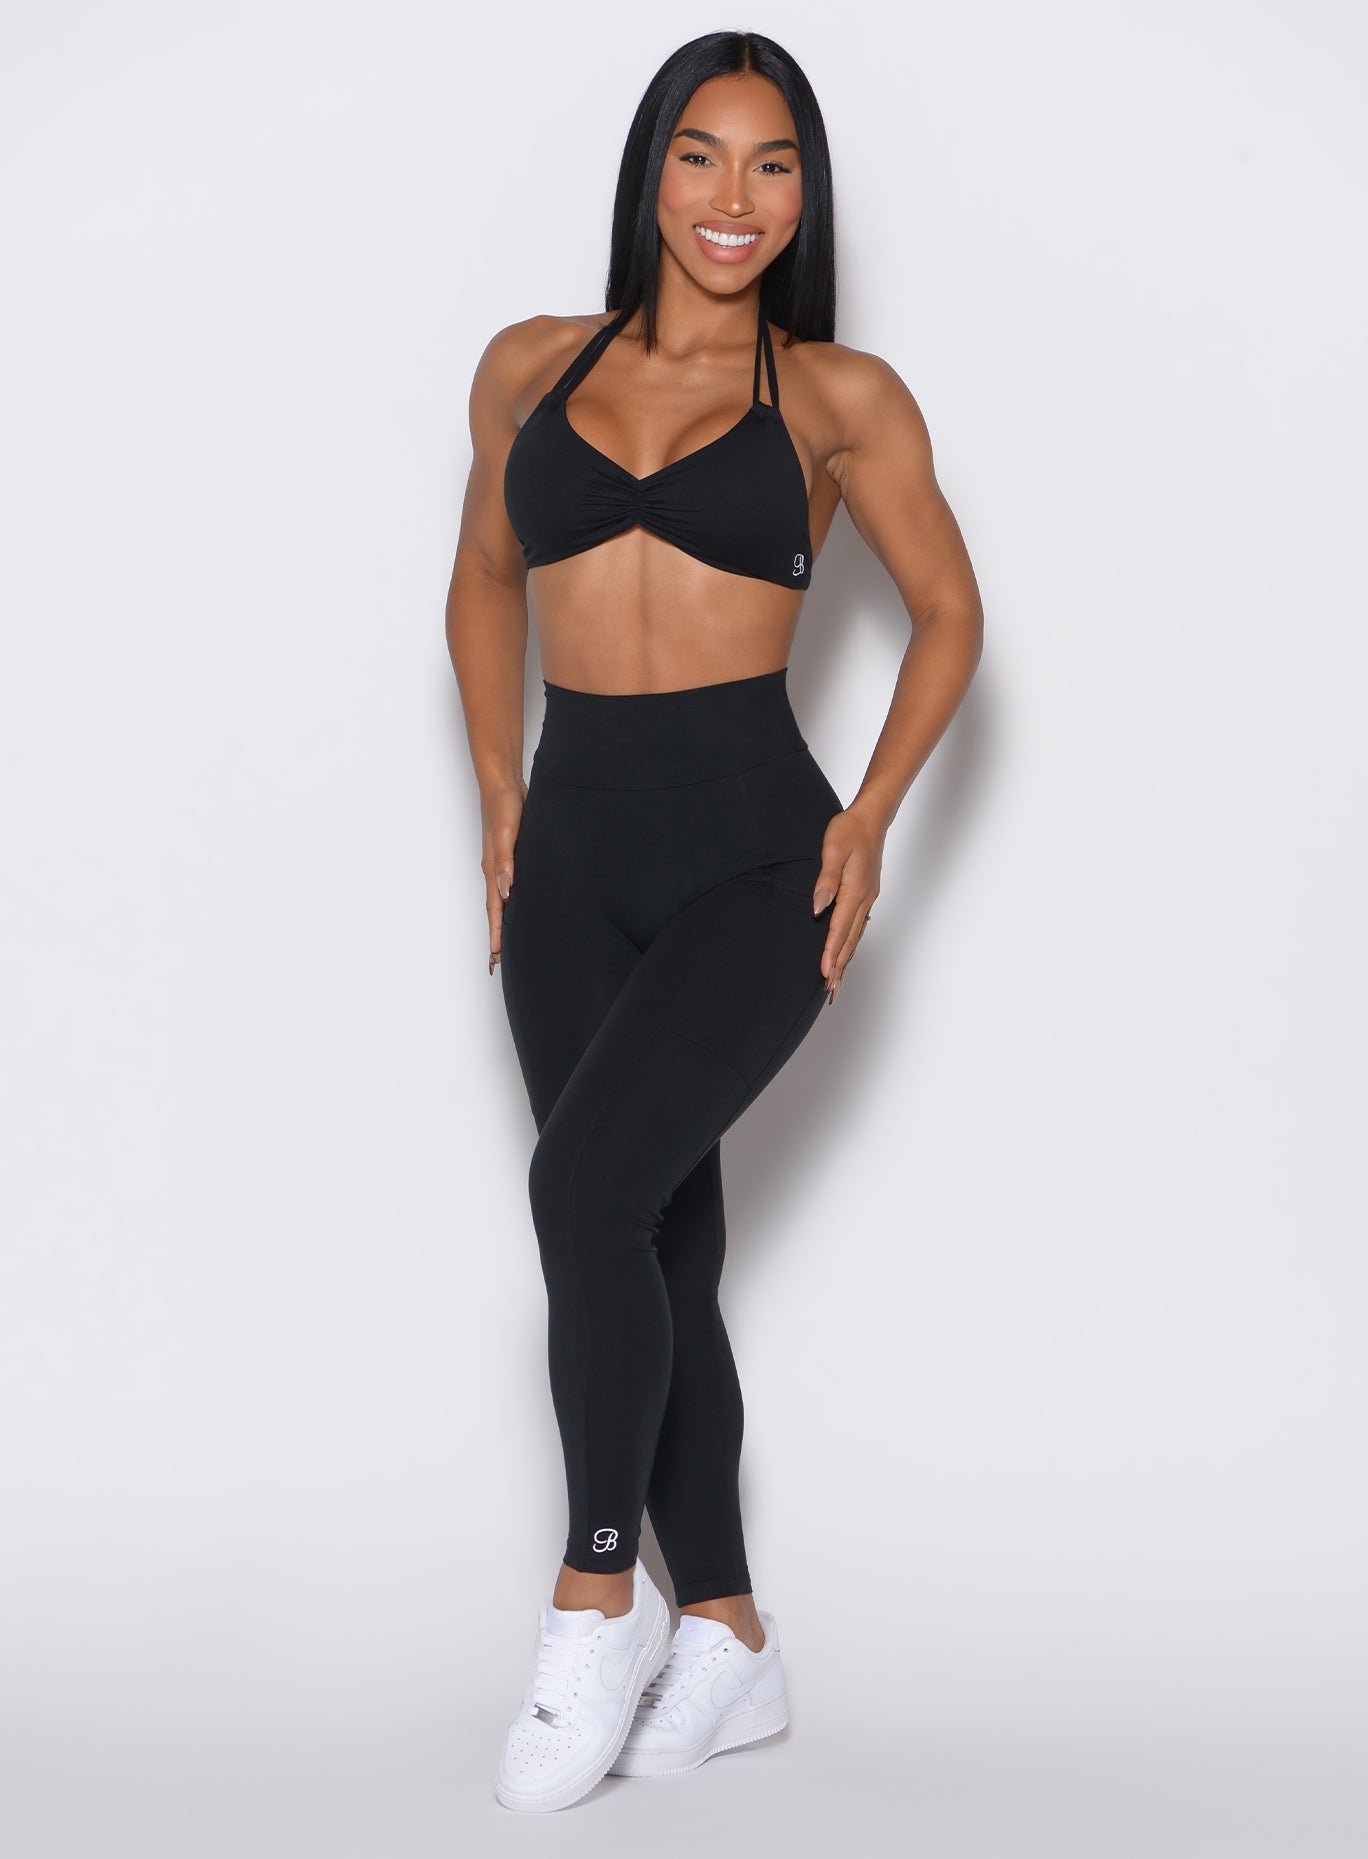 A front profile picture presents a model facing forward, showcasing our black Curves leggings paired with the matching sports bra